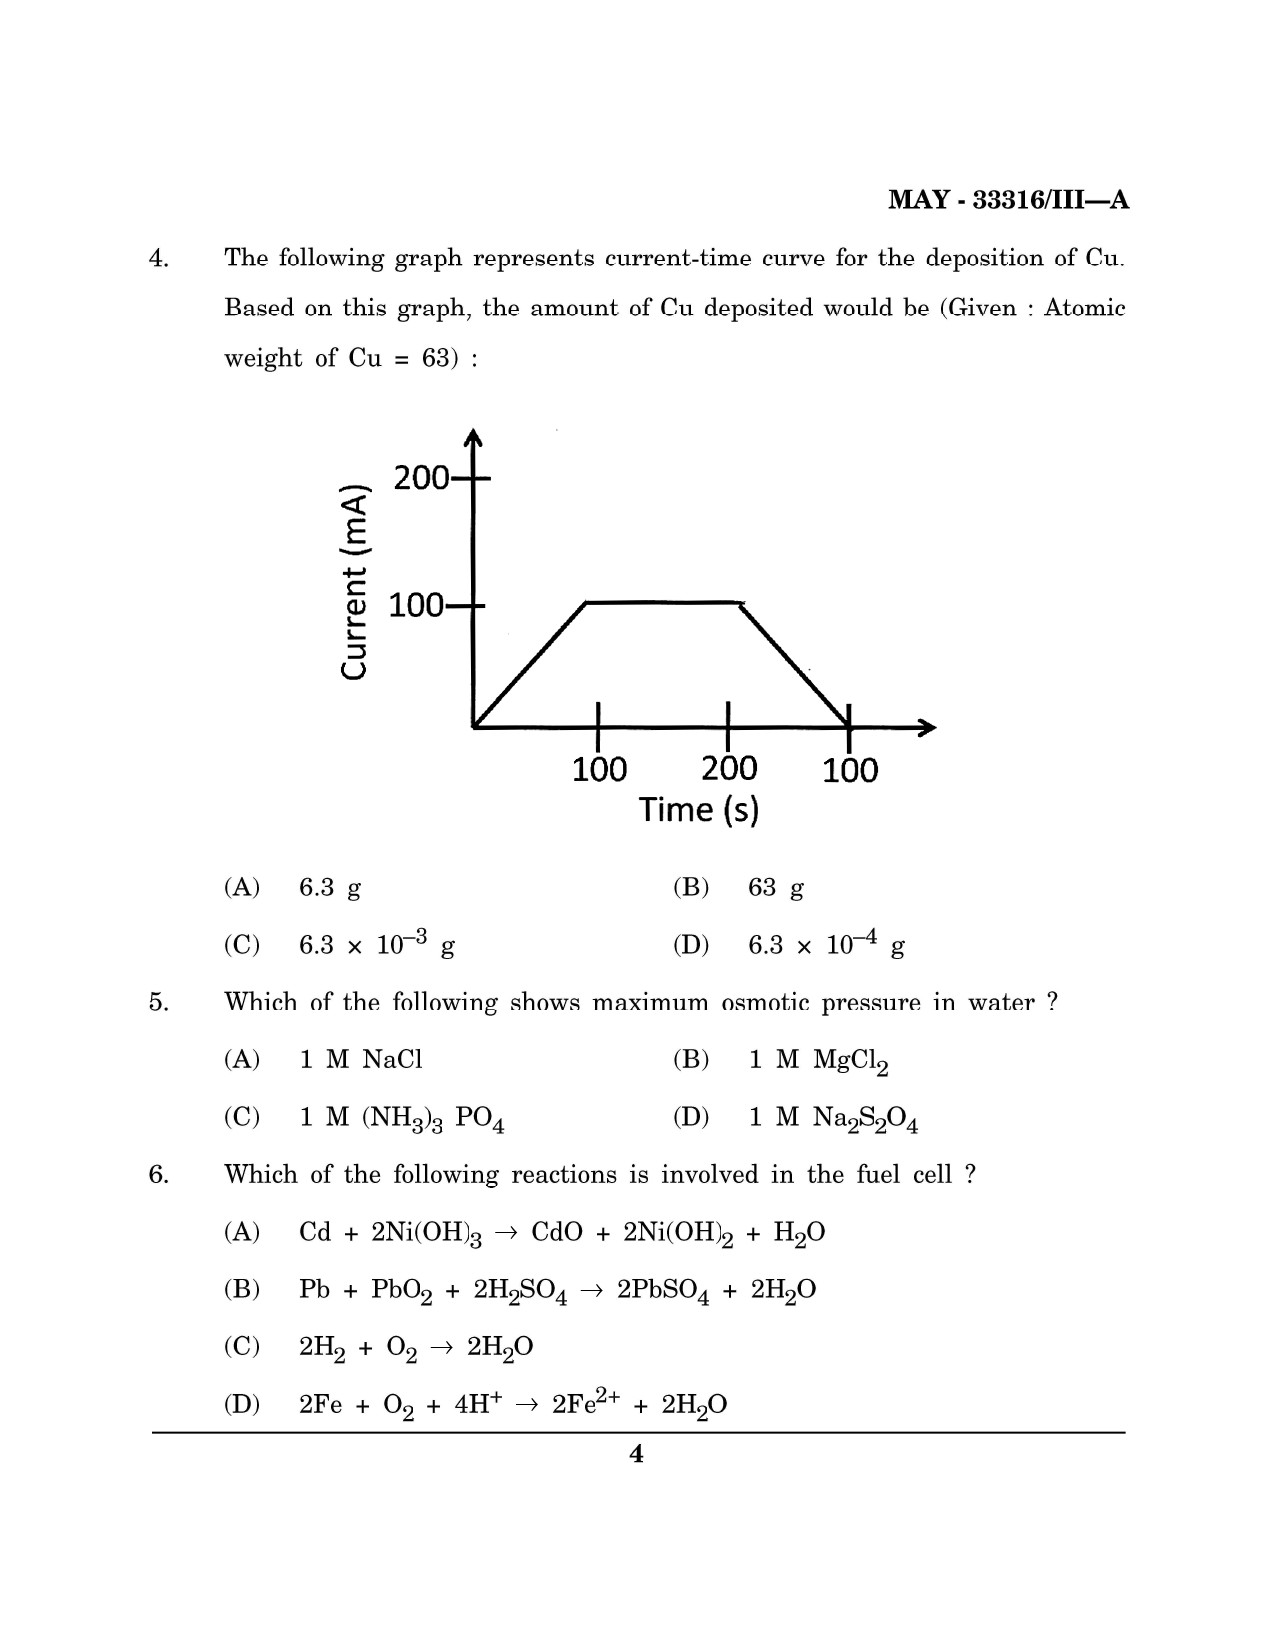 Maharashtra SET Chemical Sciences Question Paper III May 2016 3